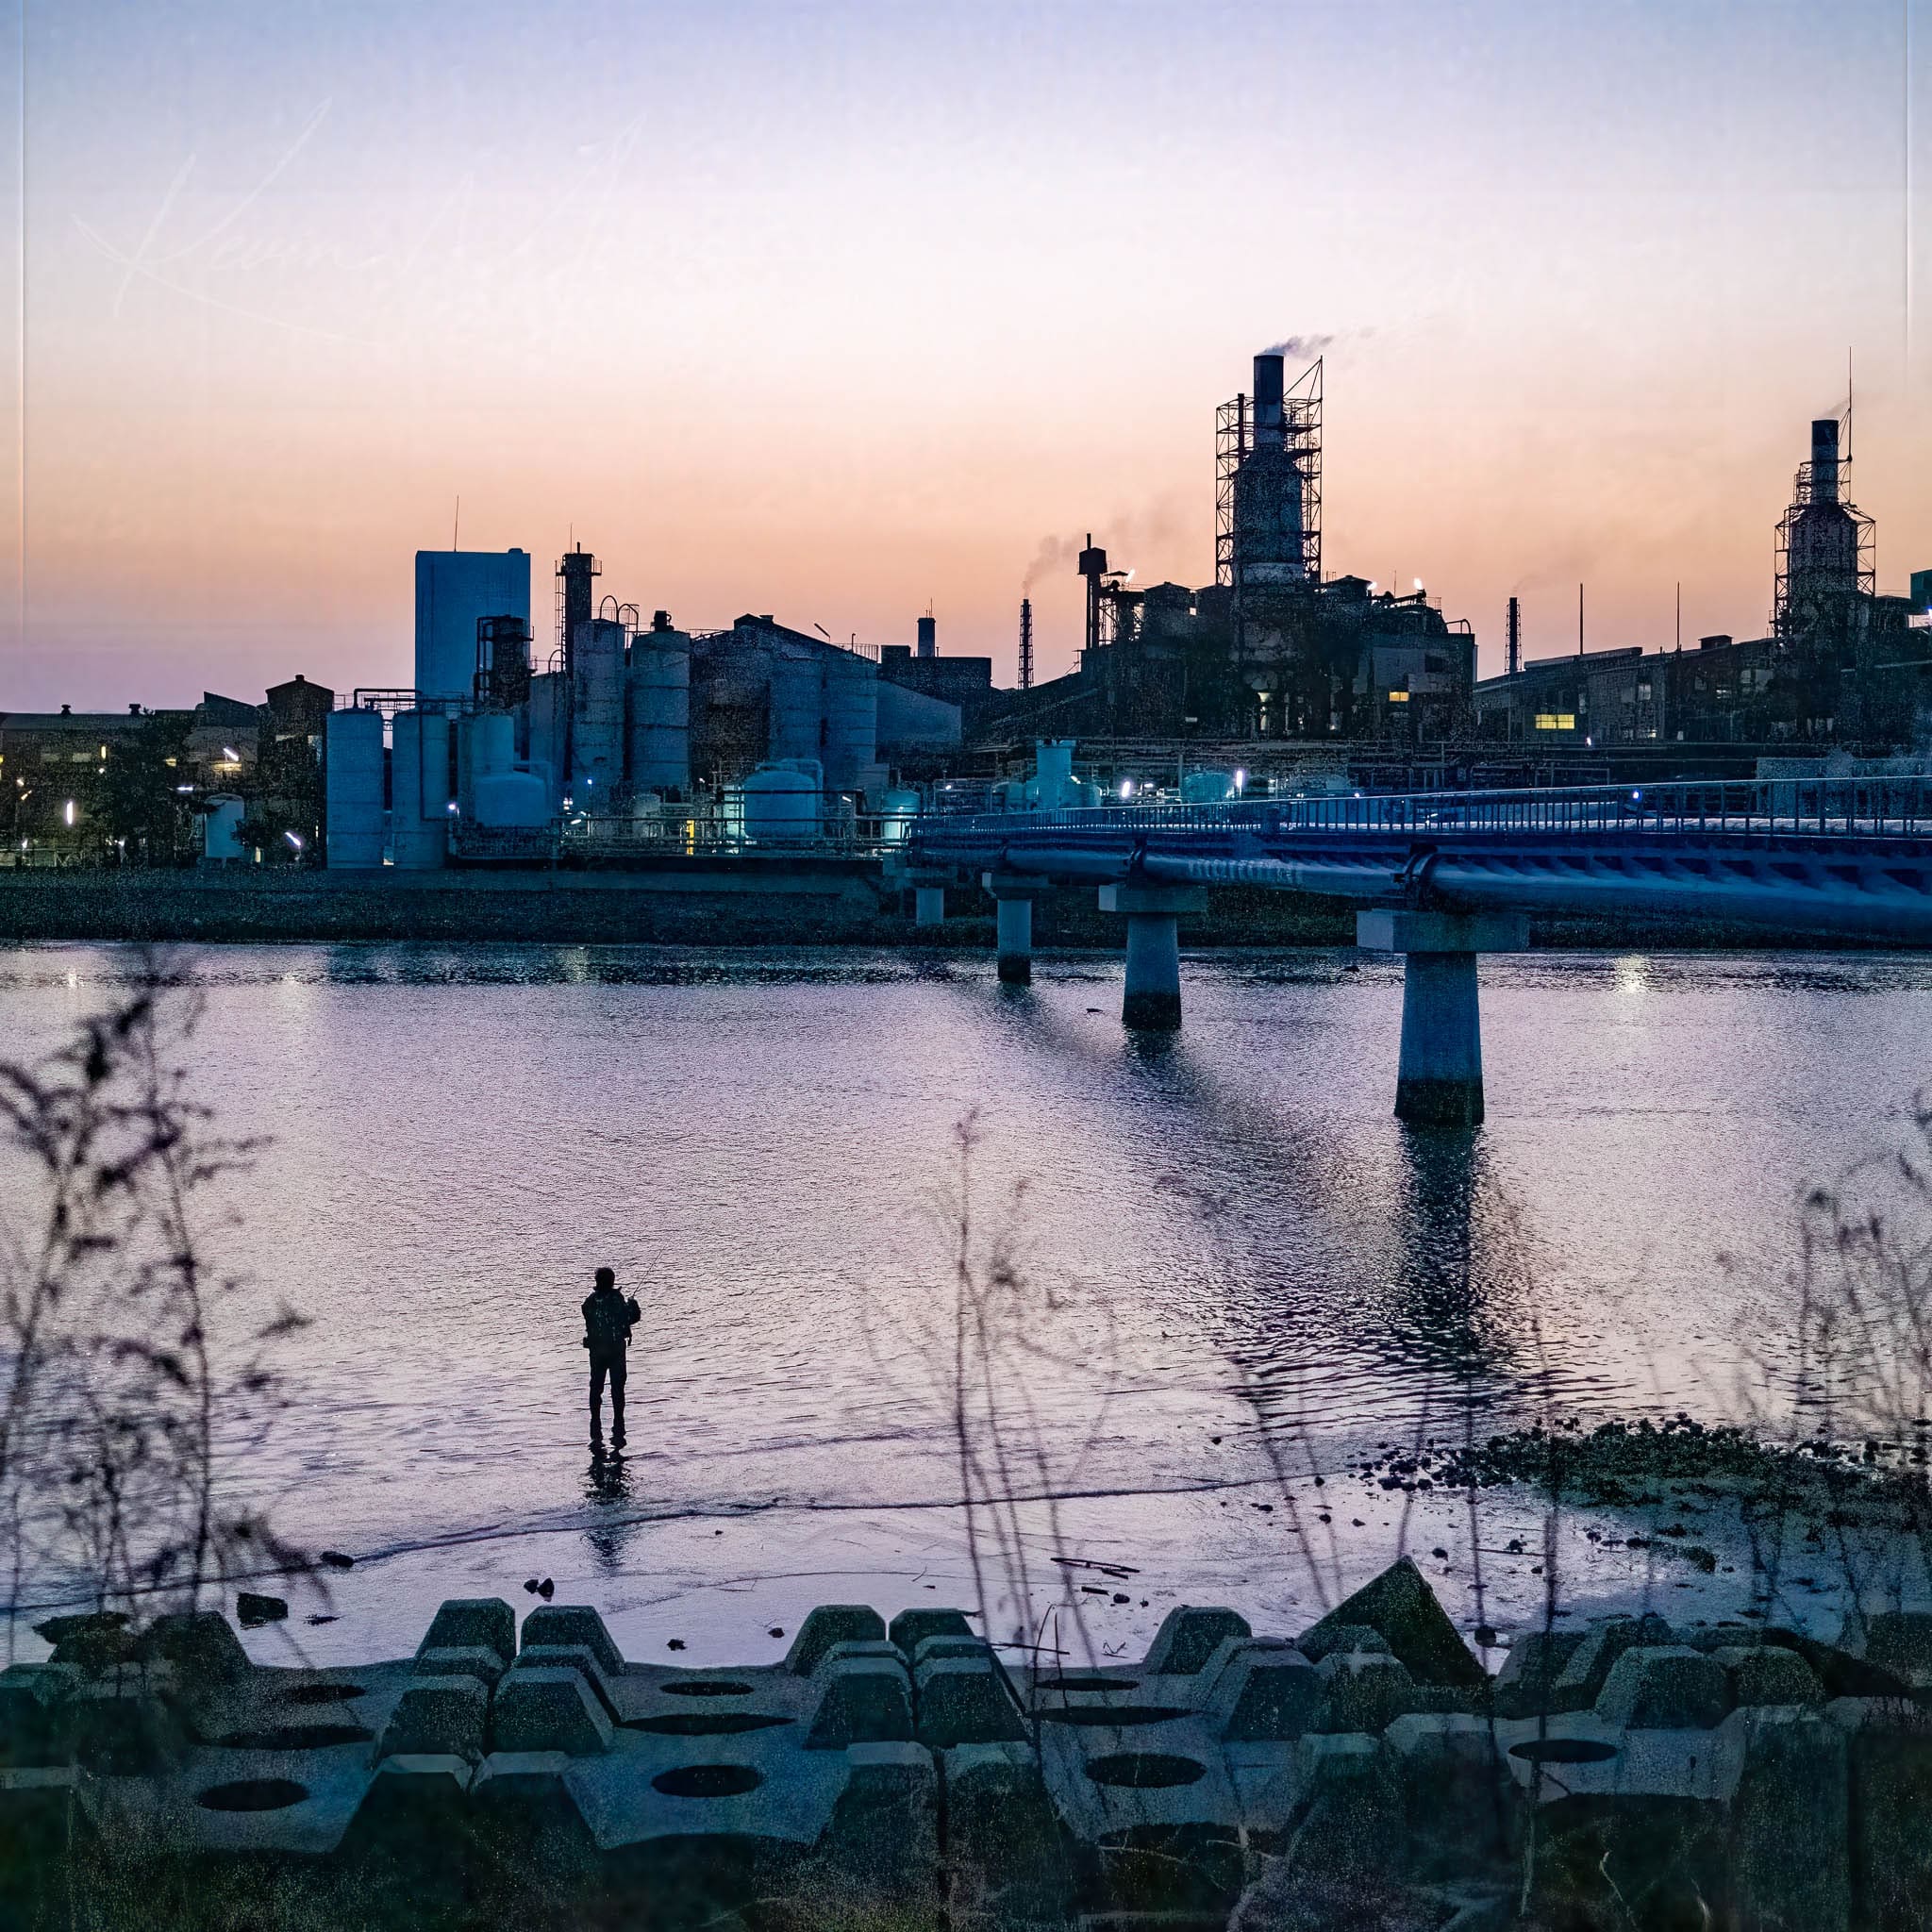 Solitary figure fishing by a serene inlet against a twilight industrial cityscape.